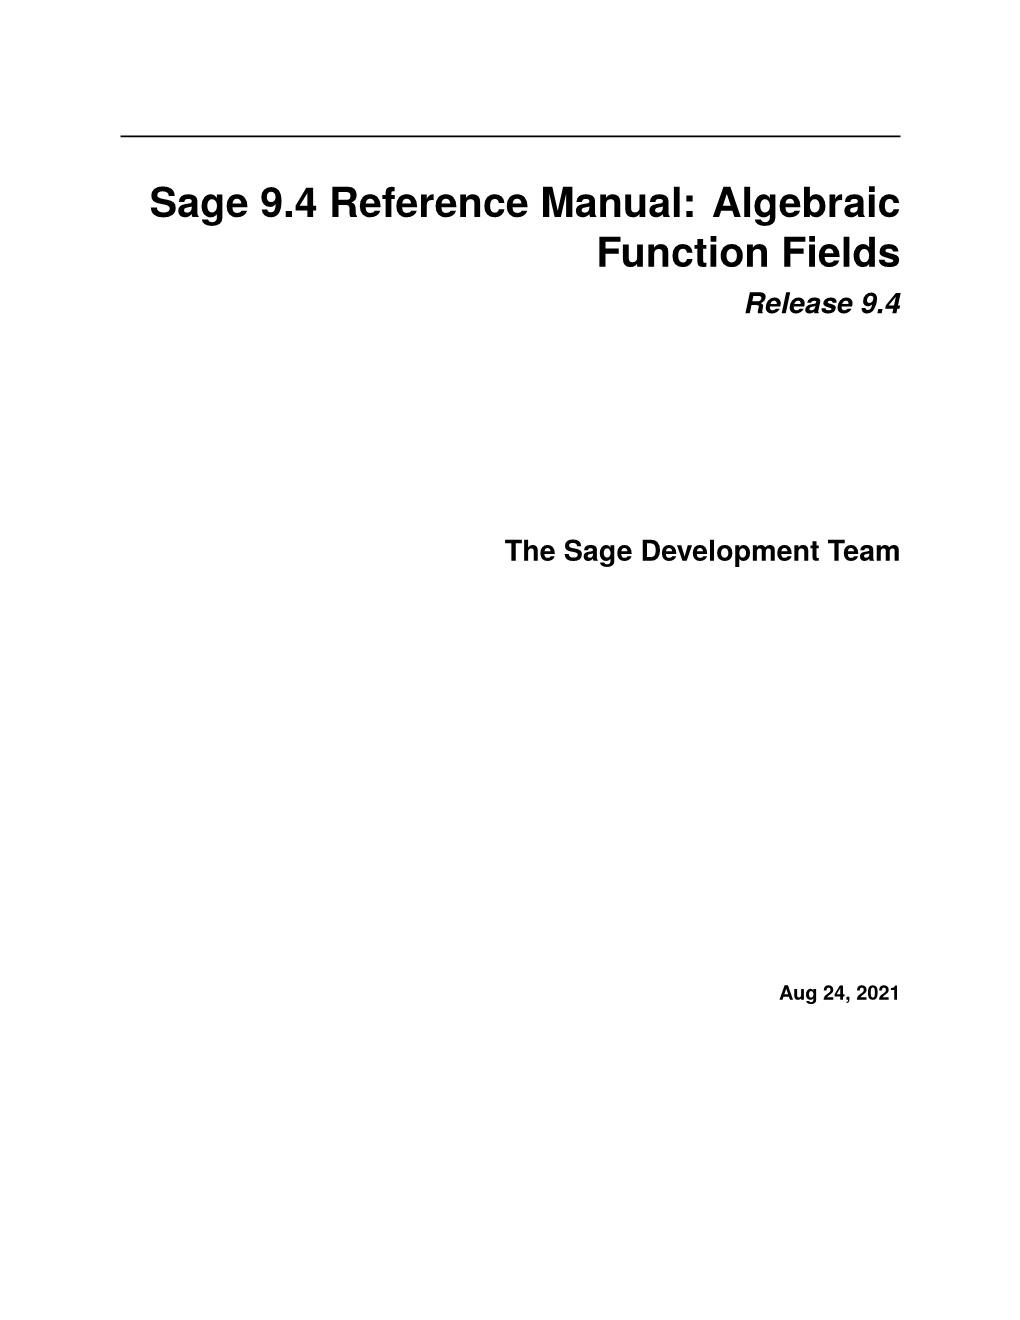 Sage 9.4 Reference Manual: Algebraic Function Fields Release 9.4